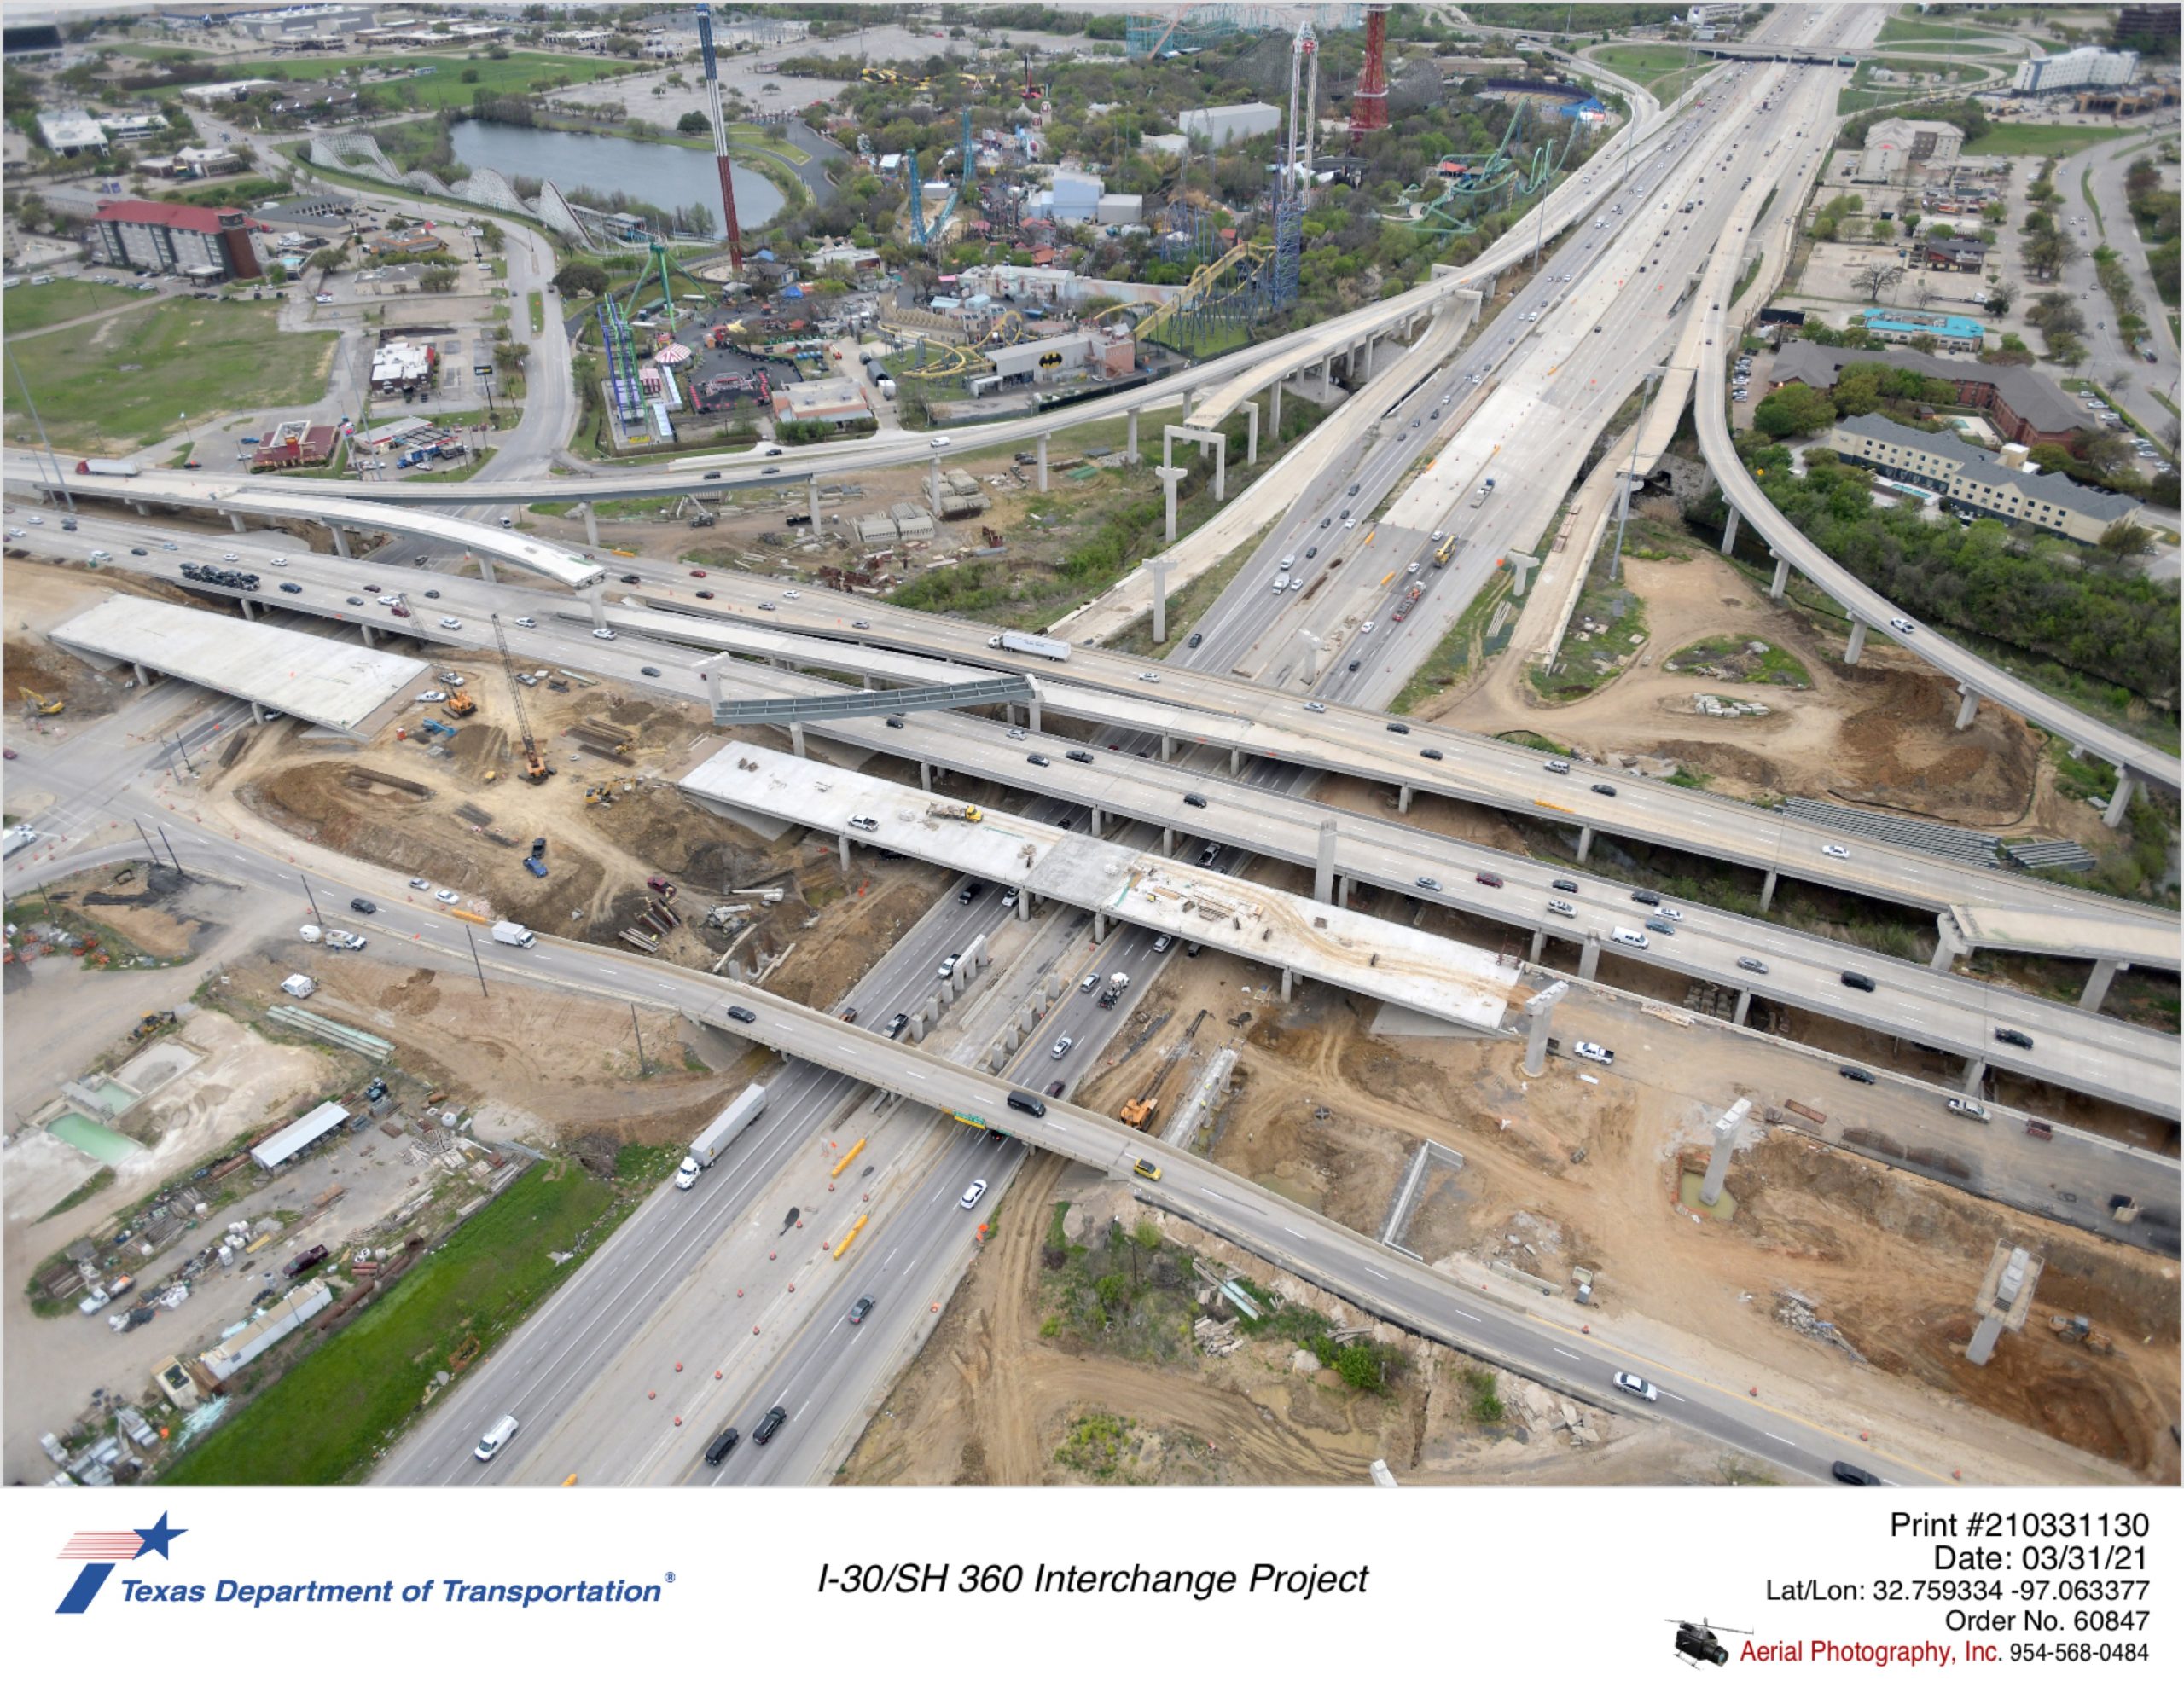 I-30 looking west at SH 360 interchange. Focus shows significant progress for SH 360 northbound mainlane bridge over Six Flags Dr and I-30, and bridge substructure work for new SH 360 northbound frontage road bridge over I-30.